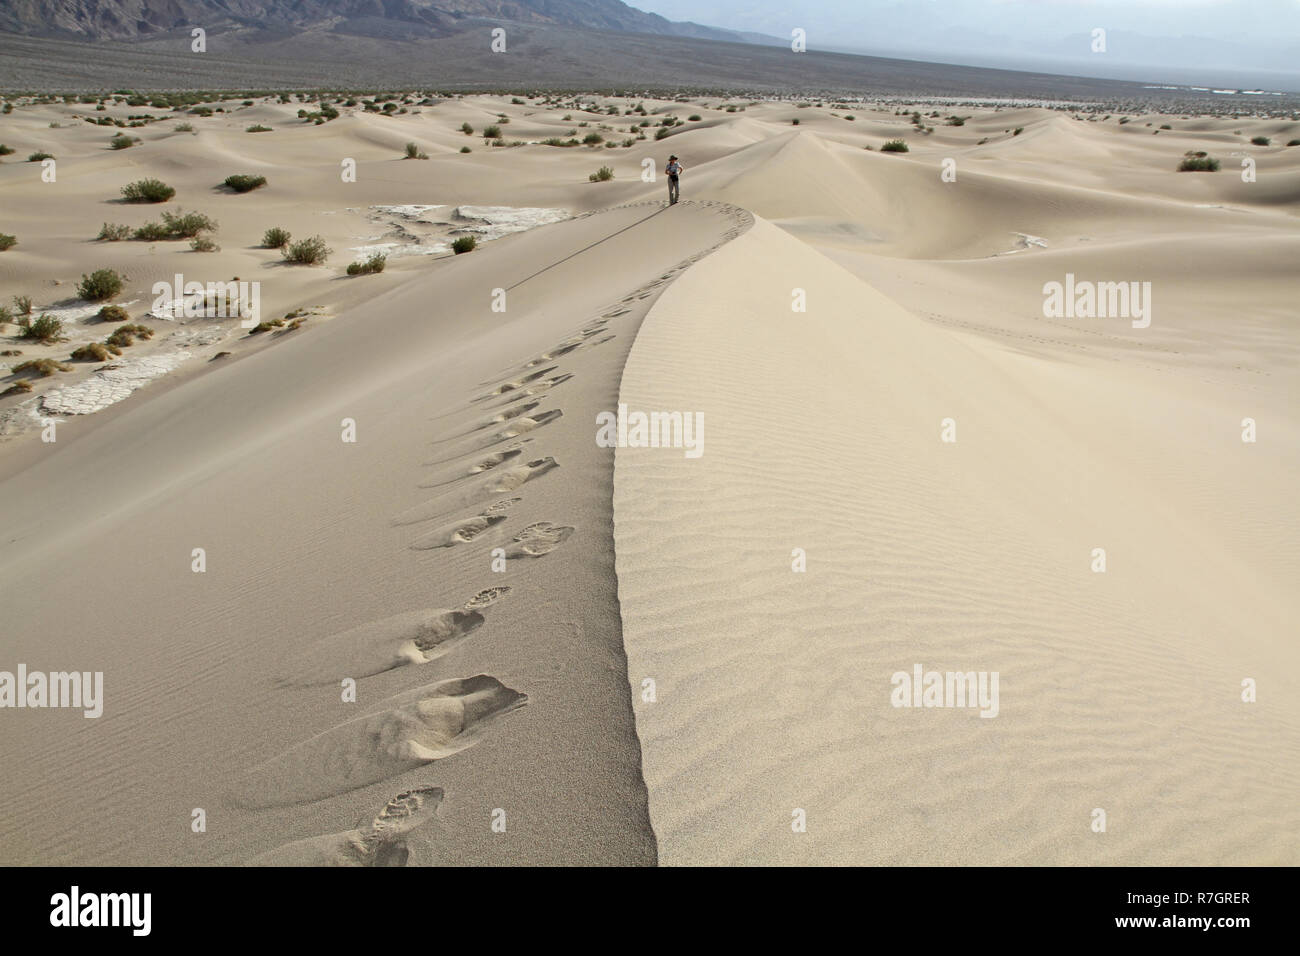 Human foot prints with human in distance along a sand dune crest Stock Photo